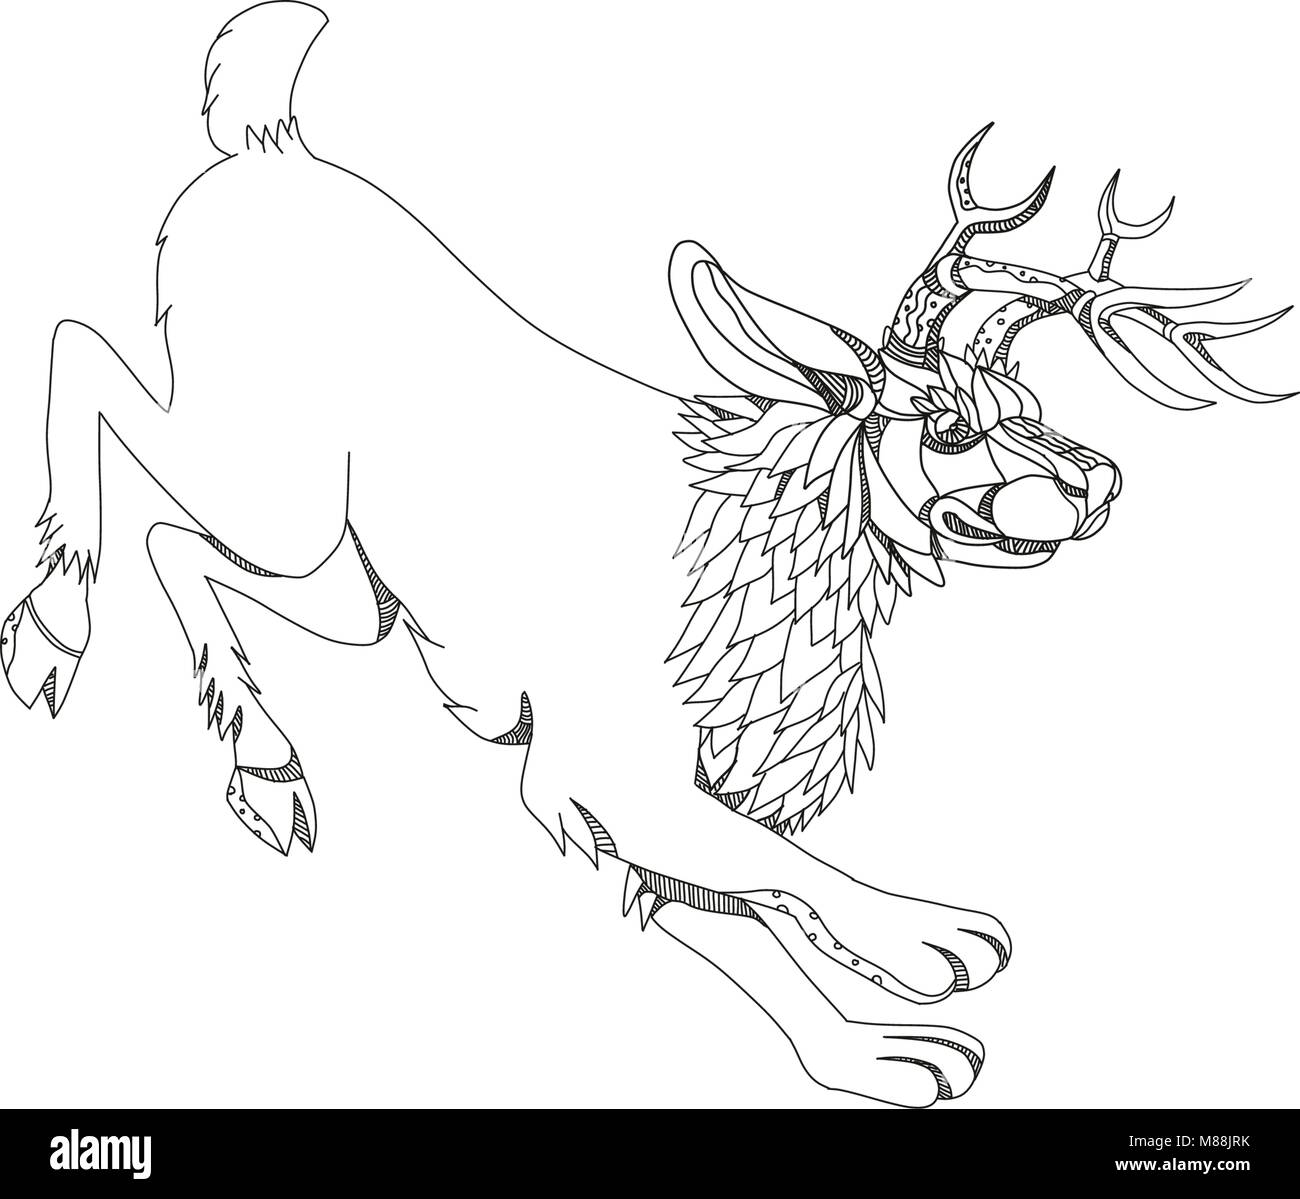 A collection of doodle art illustrations that includes the following mythical creatures from legend folklore; jackalope, krampus, skraver, wendigo and Stock Vector